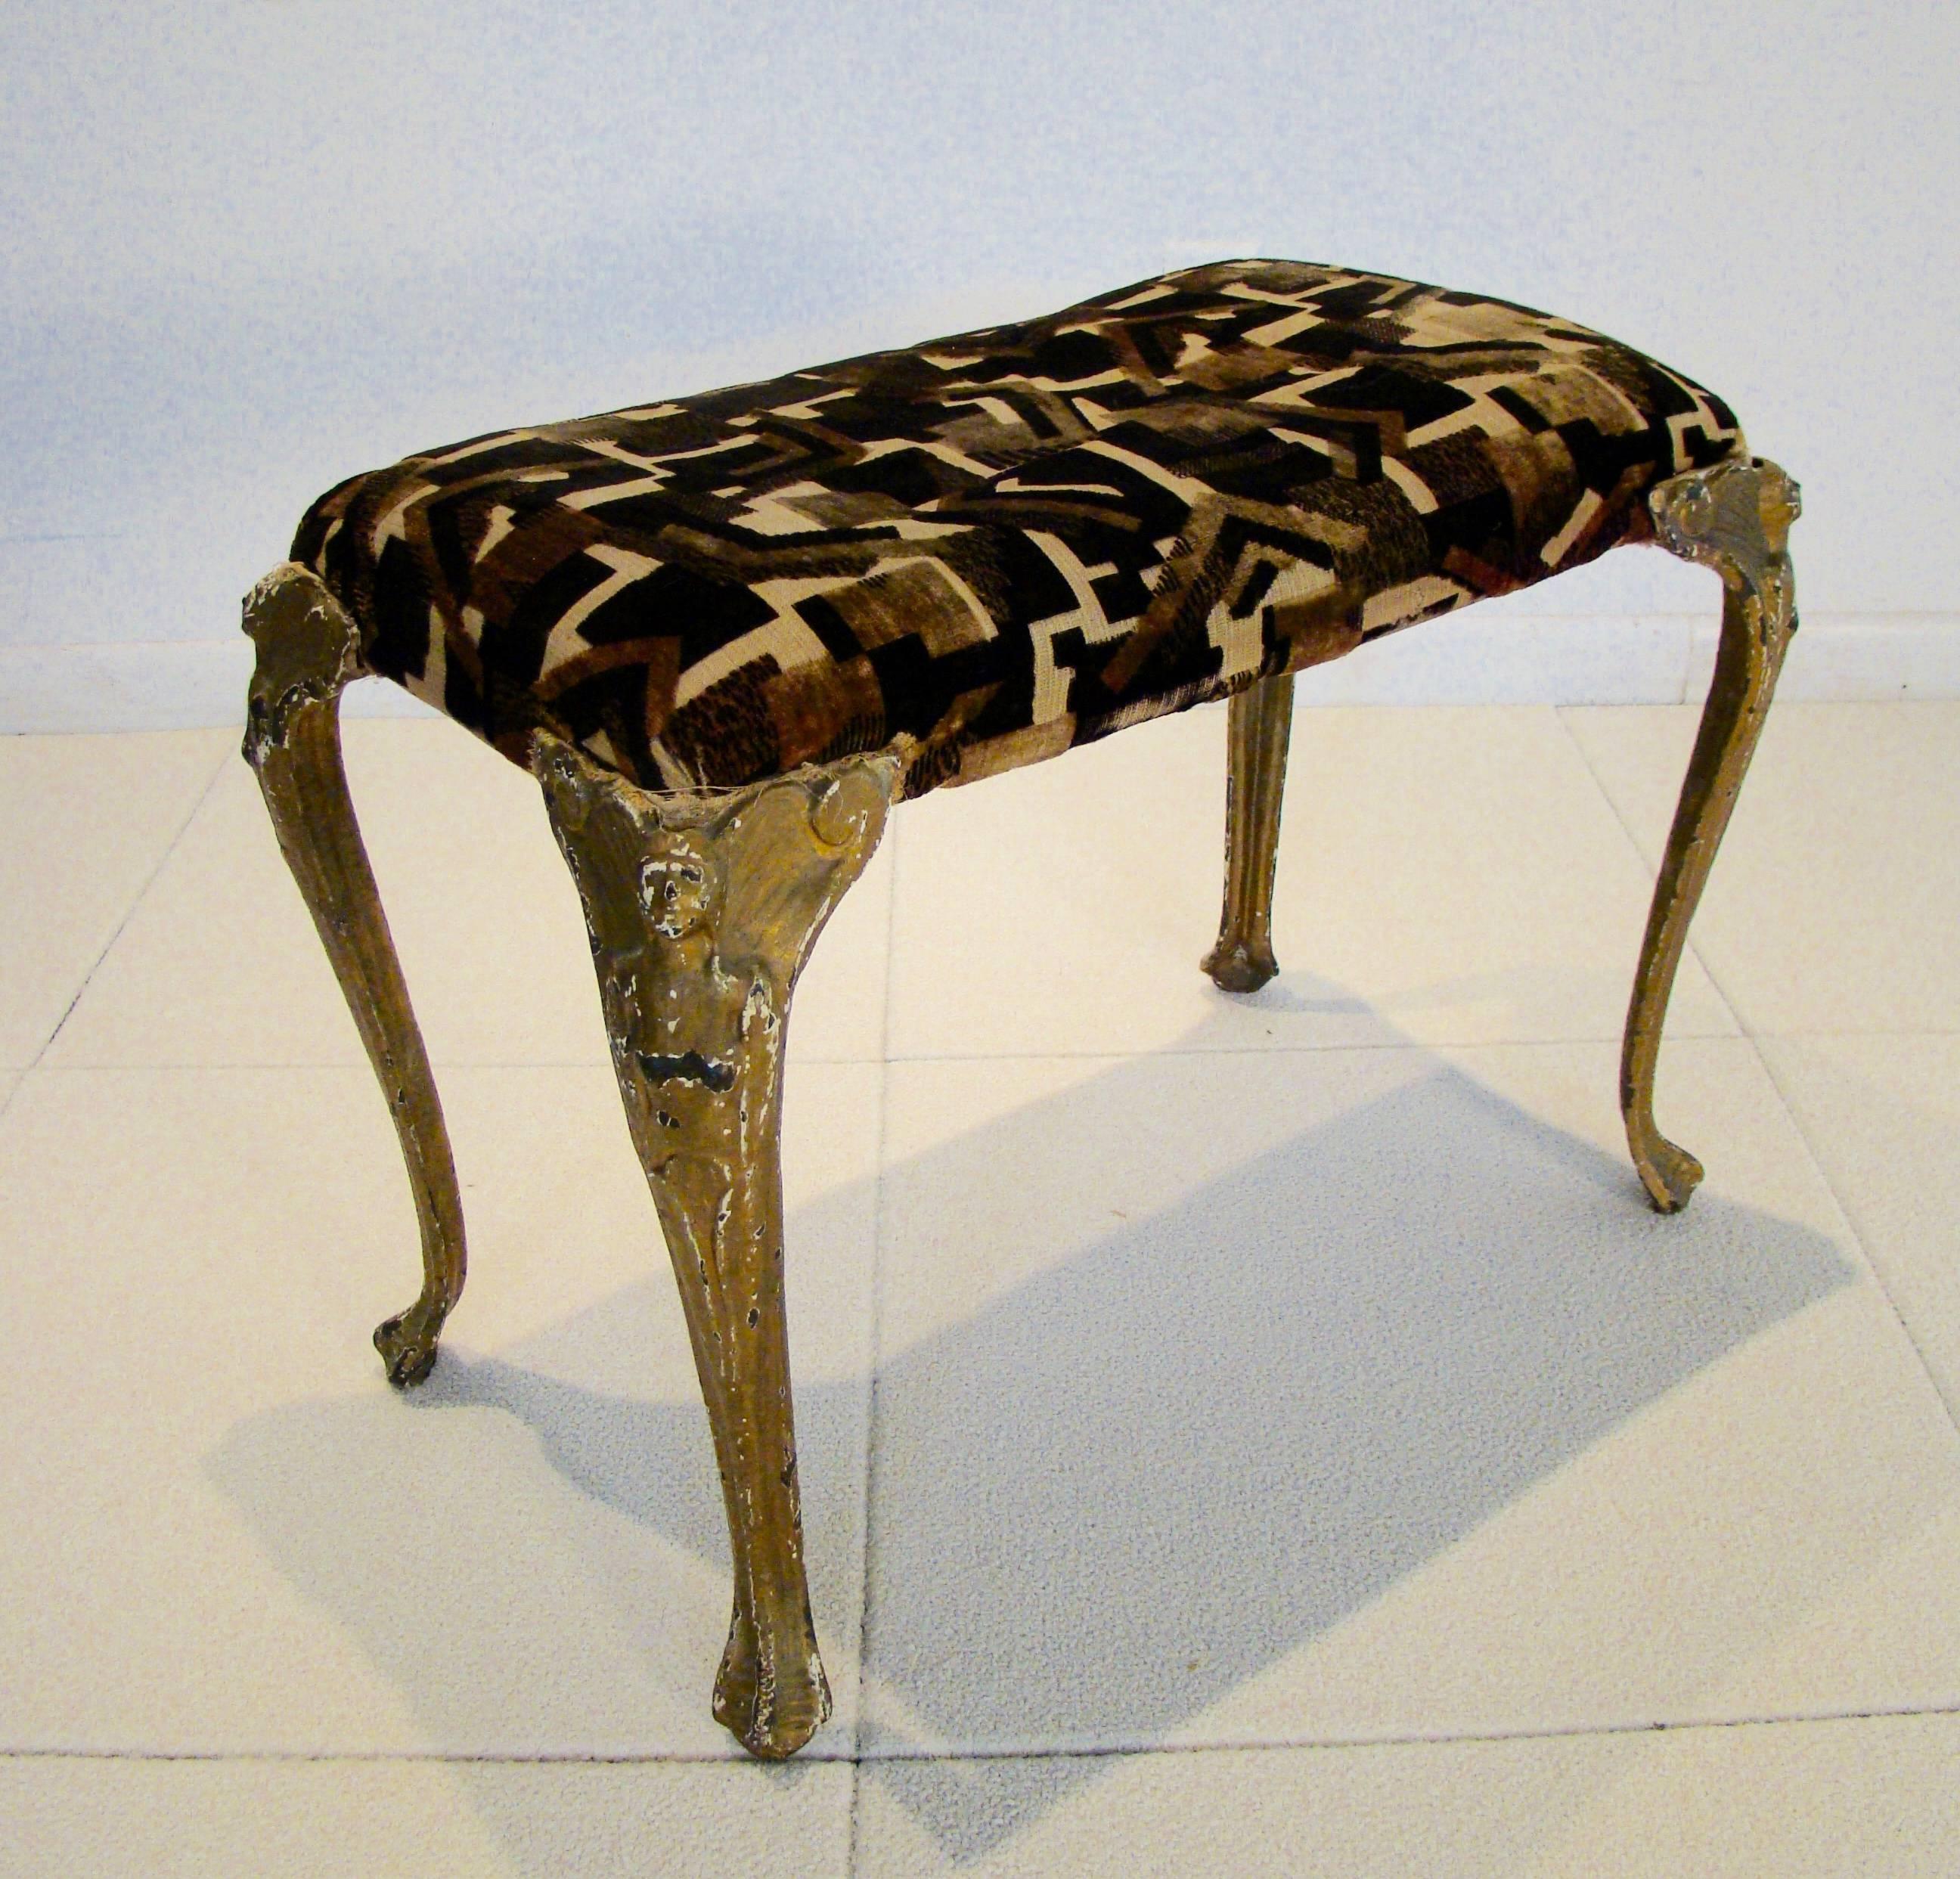 Beautiful Art Deco boudoir bench/stool with geometric upholstery and nude cast metal legs, Frankart era. Legs are by Art Specialty 824. Piece looks to have been reupholstered at some point but a killer choice with the period correct geometrics.